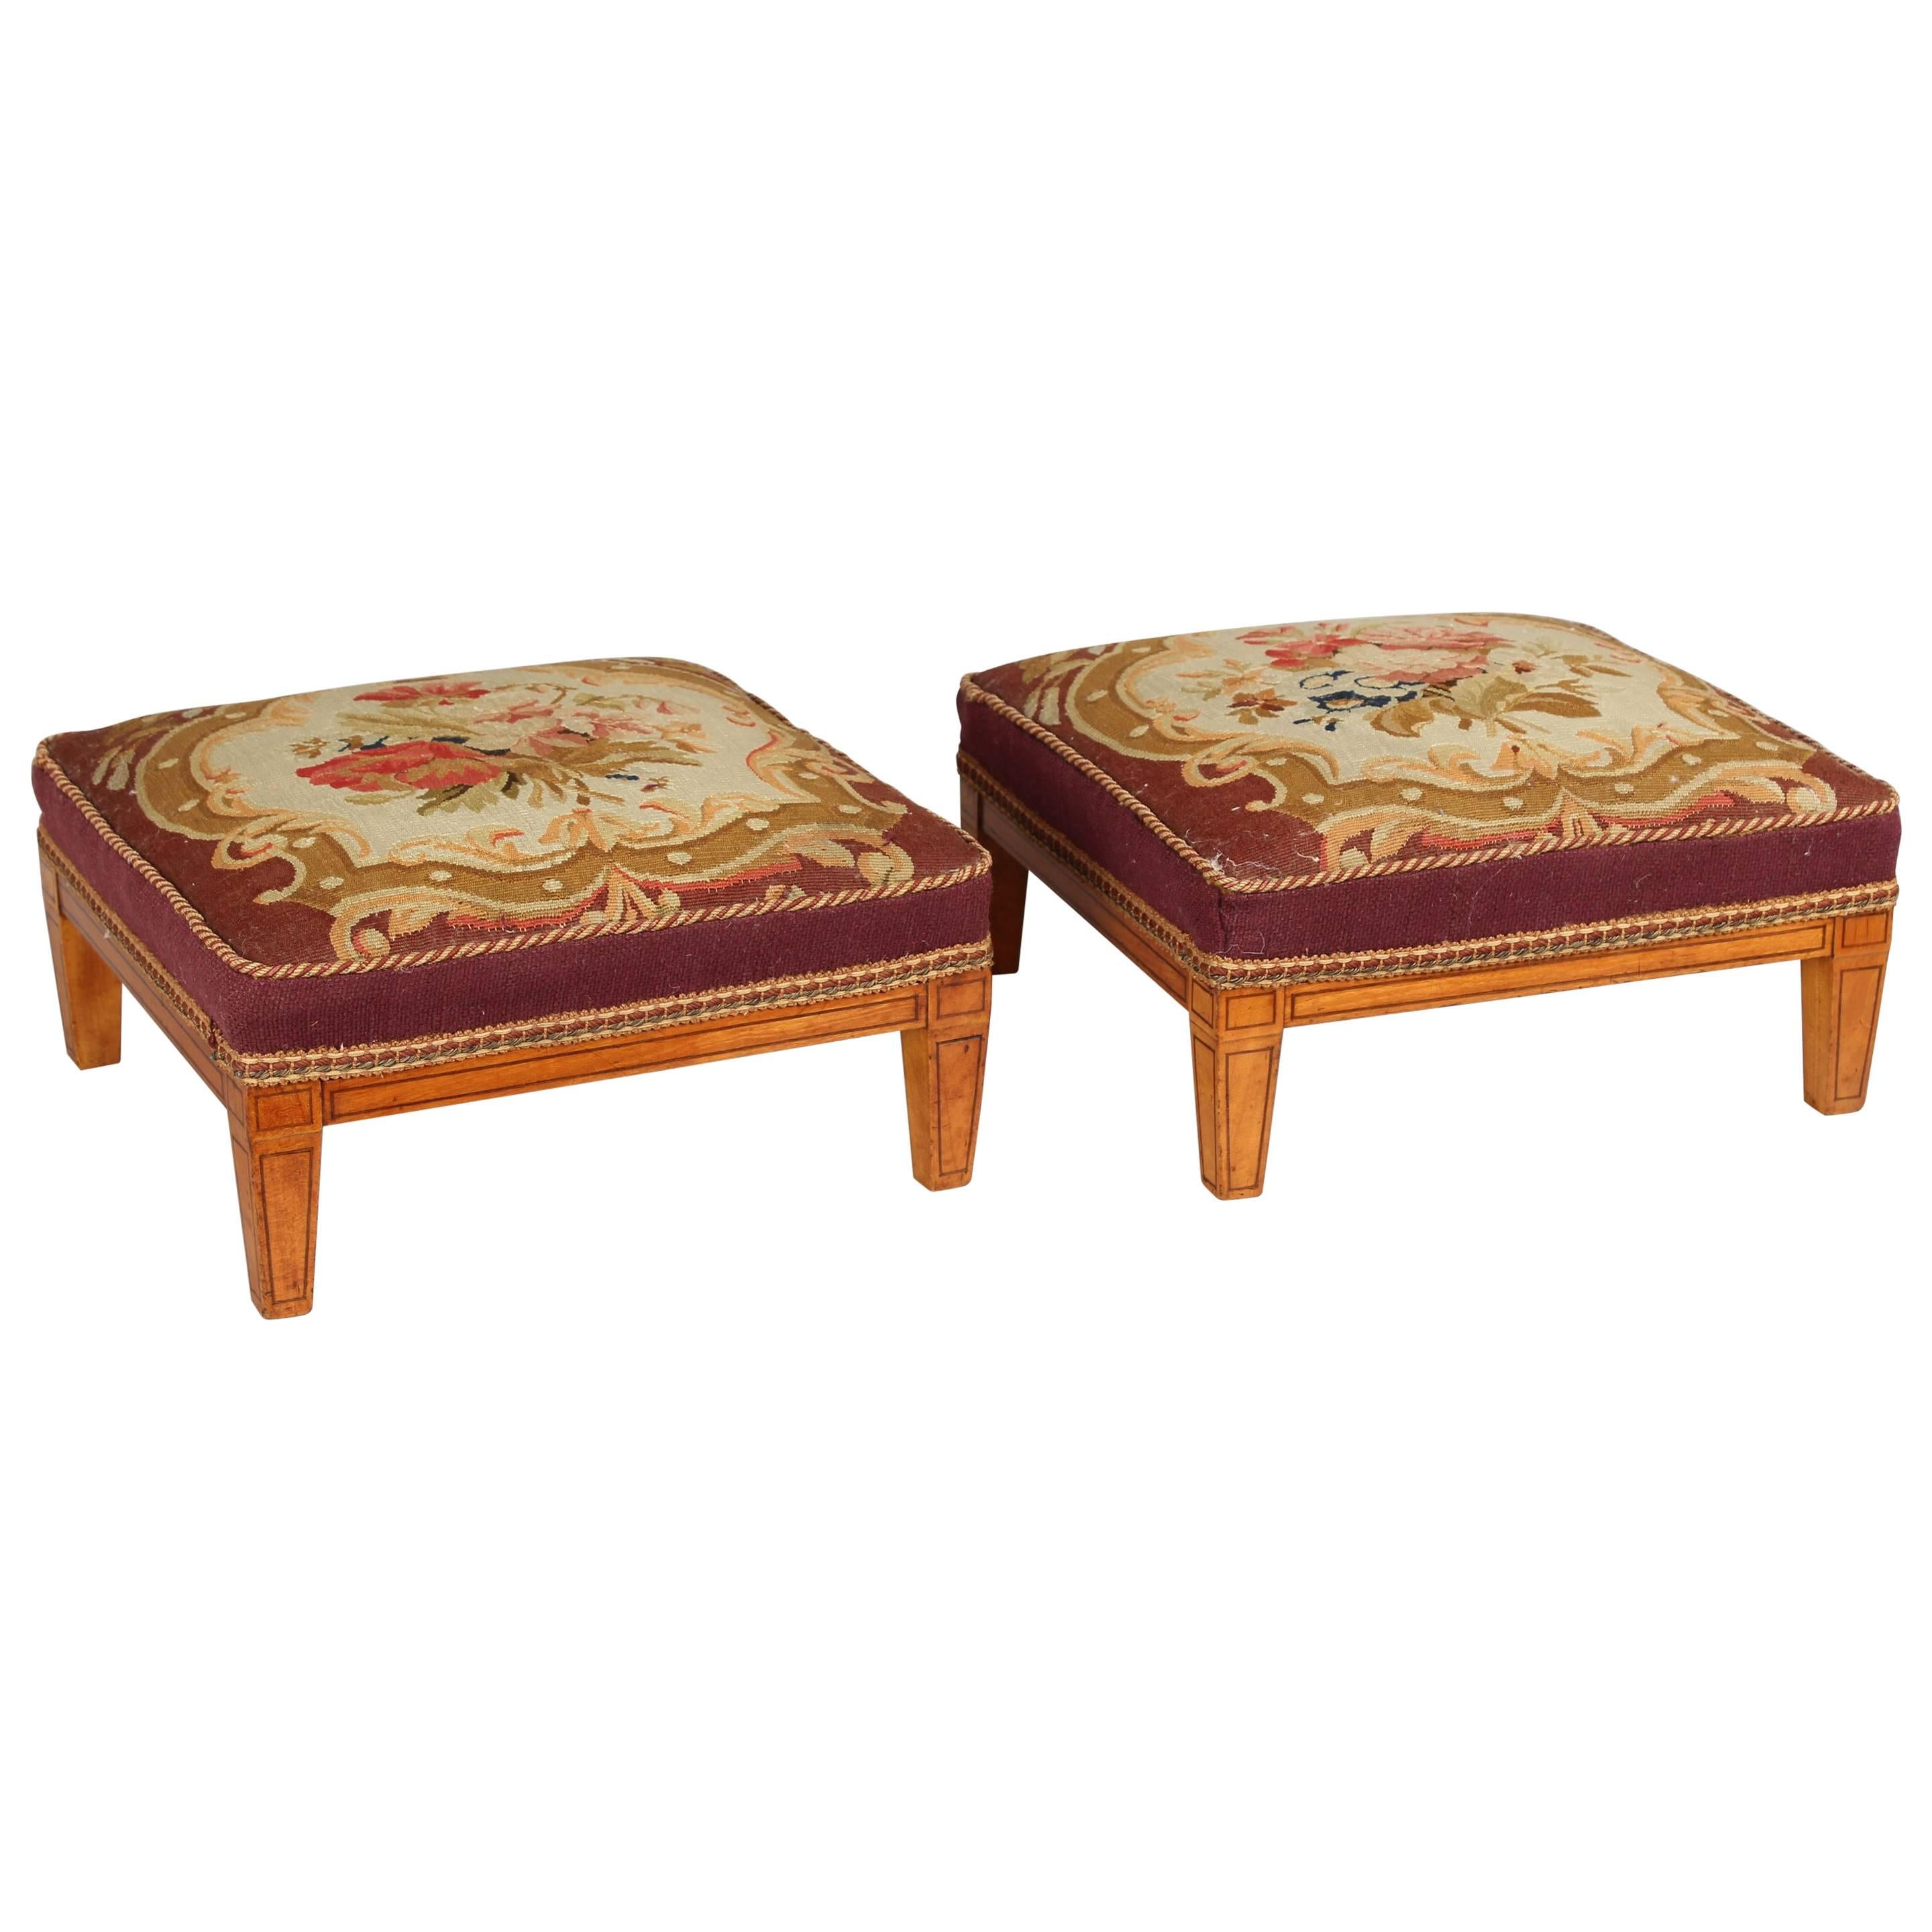 Pair of Late George III Period Satin-Birch Foot-Stools